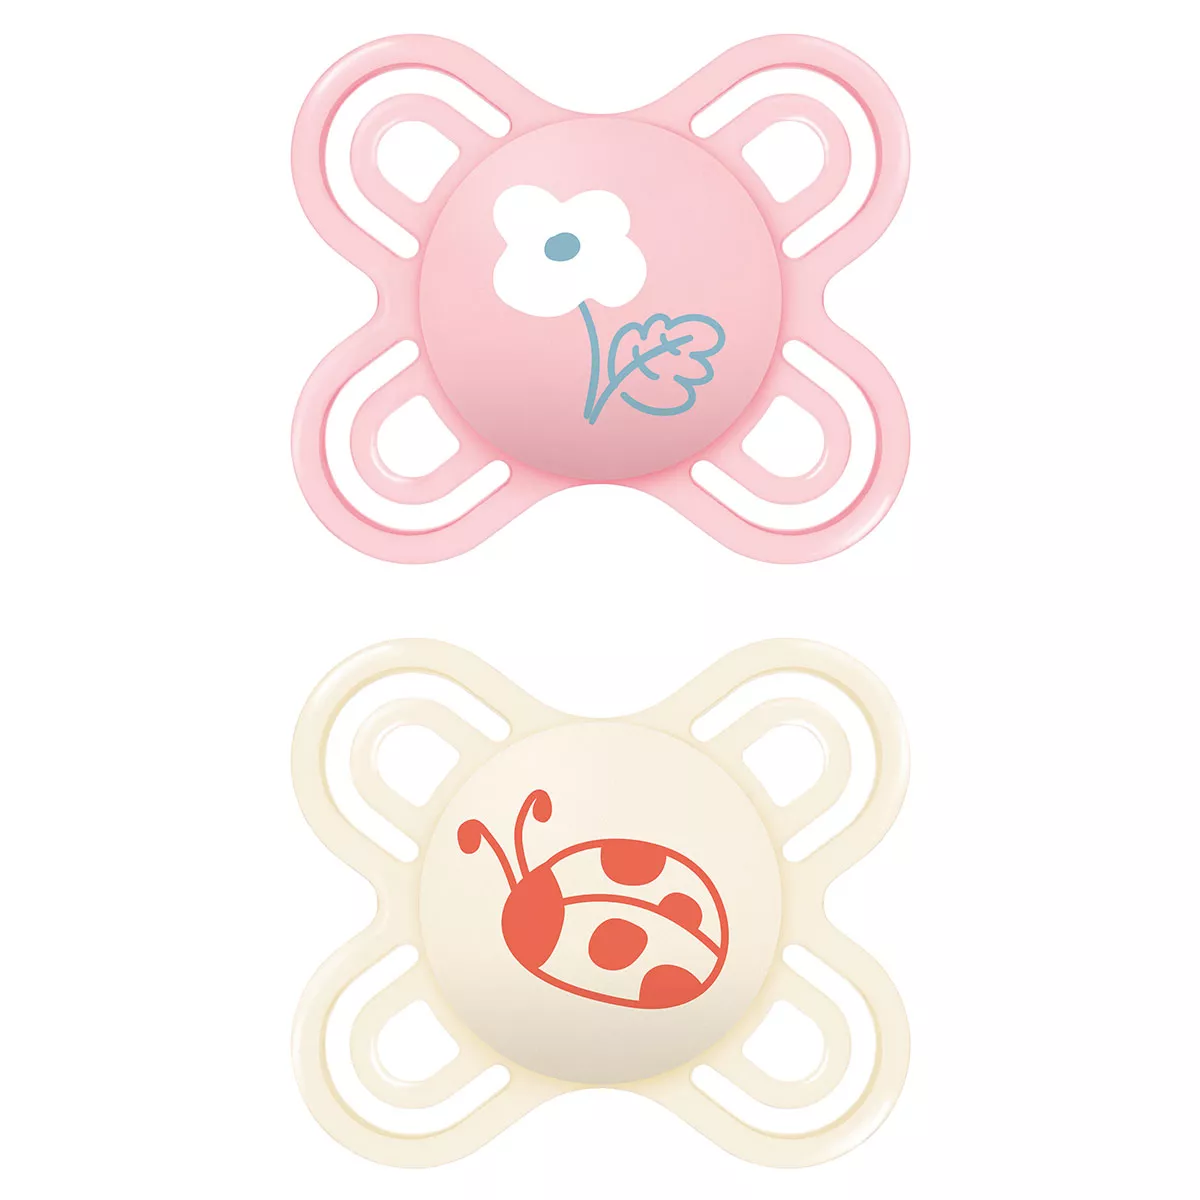 MAM Perfect Start Soother 0-2 months, set of 2